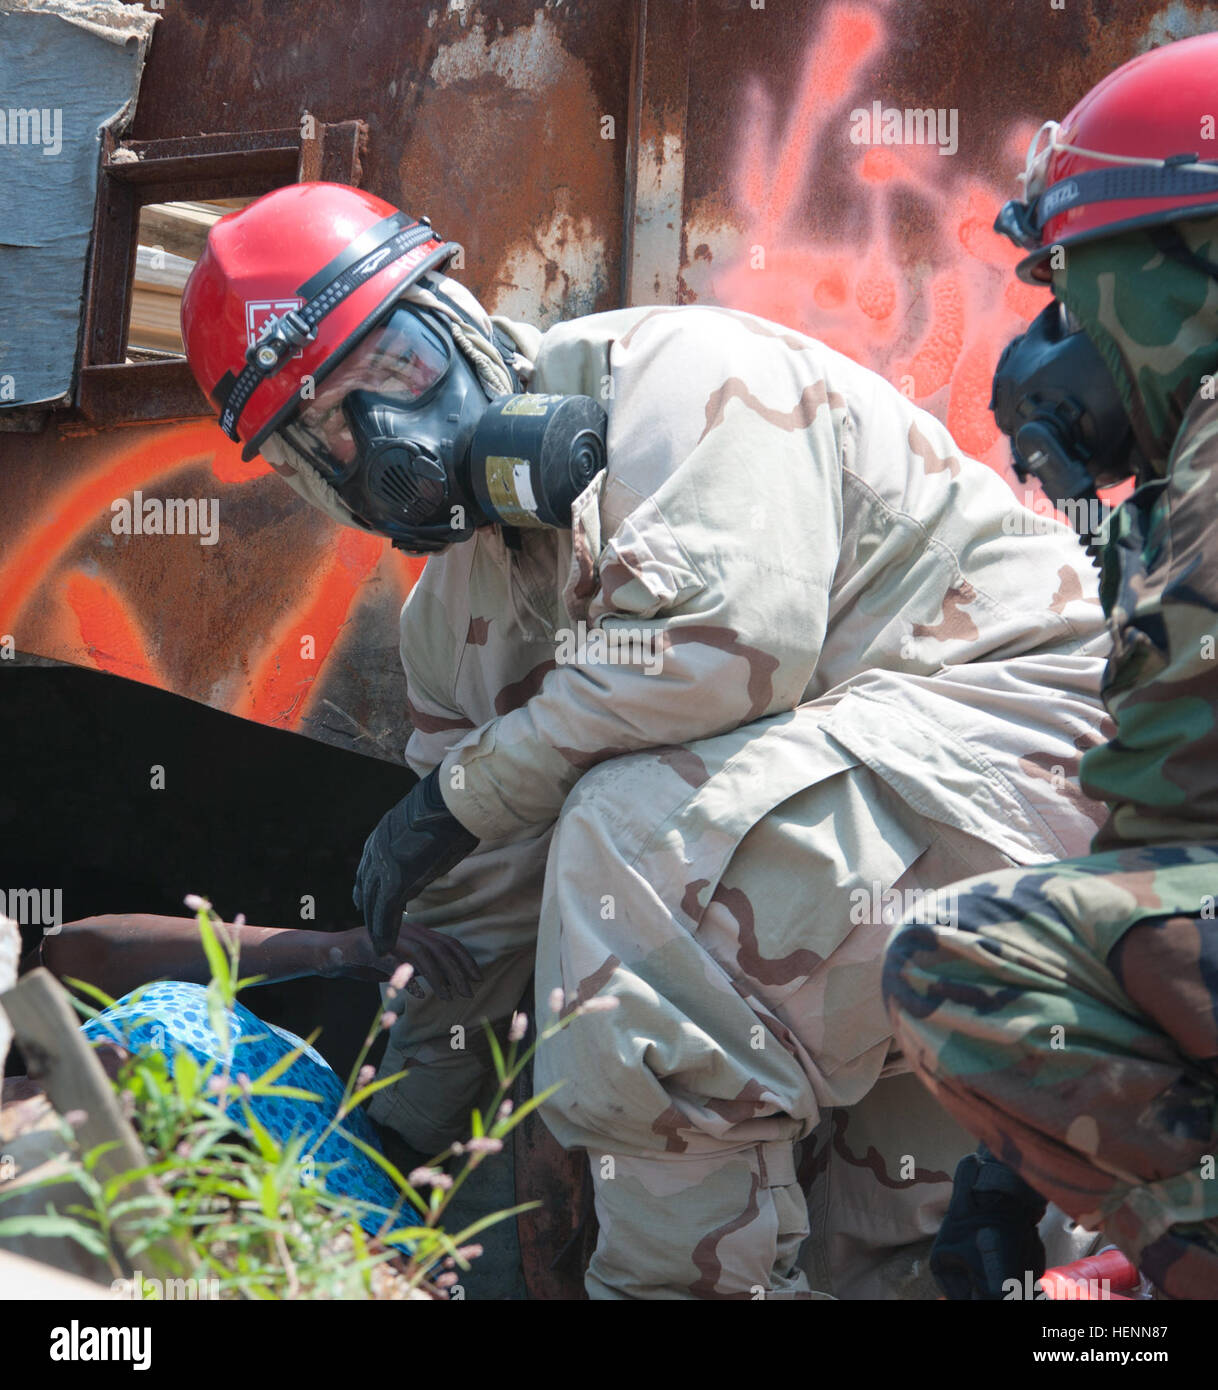 Soldiers of the 11th Engineer Battalion, Fort Benning, Ga., evacuate survivors of a nuclear blast, escorting them to a decontamination zone to receive medical treatment during Vibrant Response, a training exercise held at the Muscatatuck Urban Training Complex, Ind., July 24, 2014. Vibrant Response is a major field training exercise conducted by the U.S. Northern Command and led by U.S. Army North. Approximately 5,000 service members and civilians from the military and other federal and state agencies throughout the country are training to respond to a catastrophic domestic incident. As a comp Stock Photo